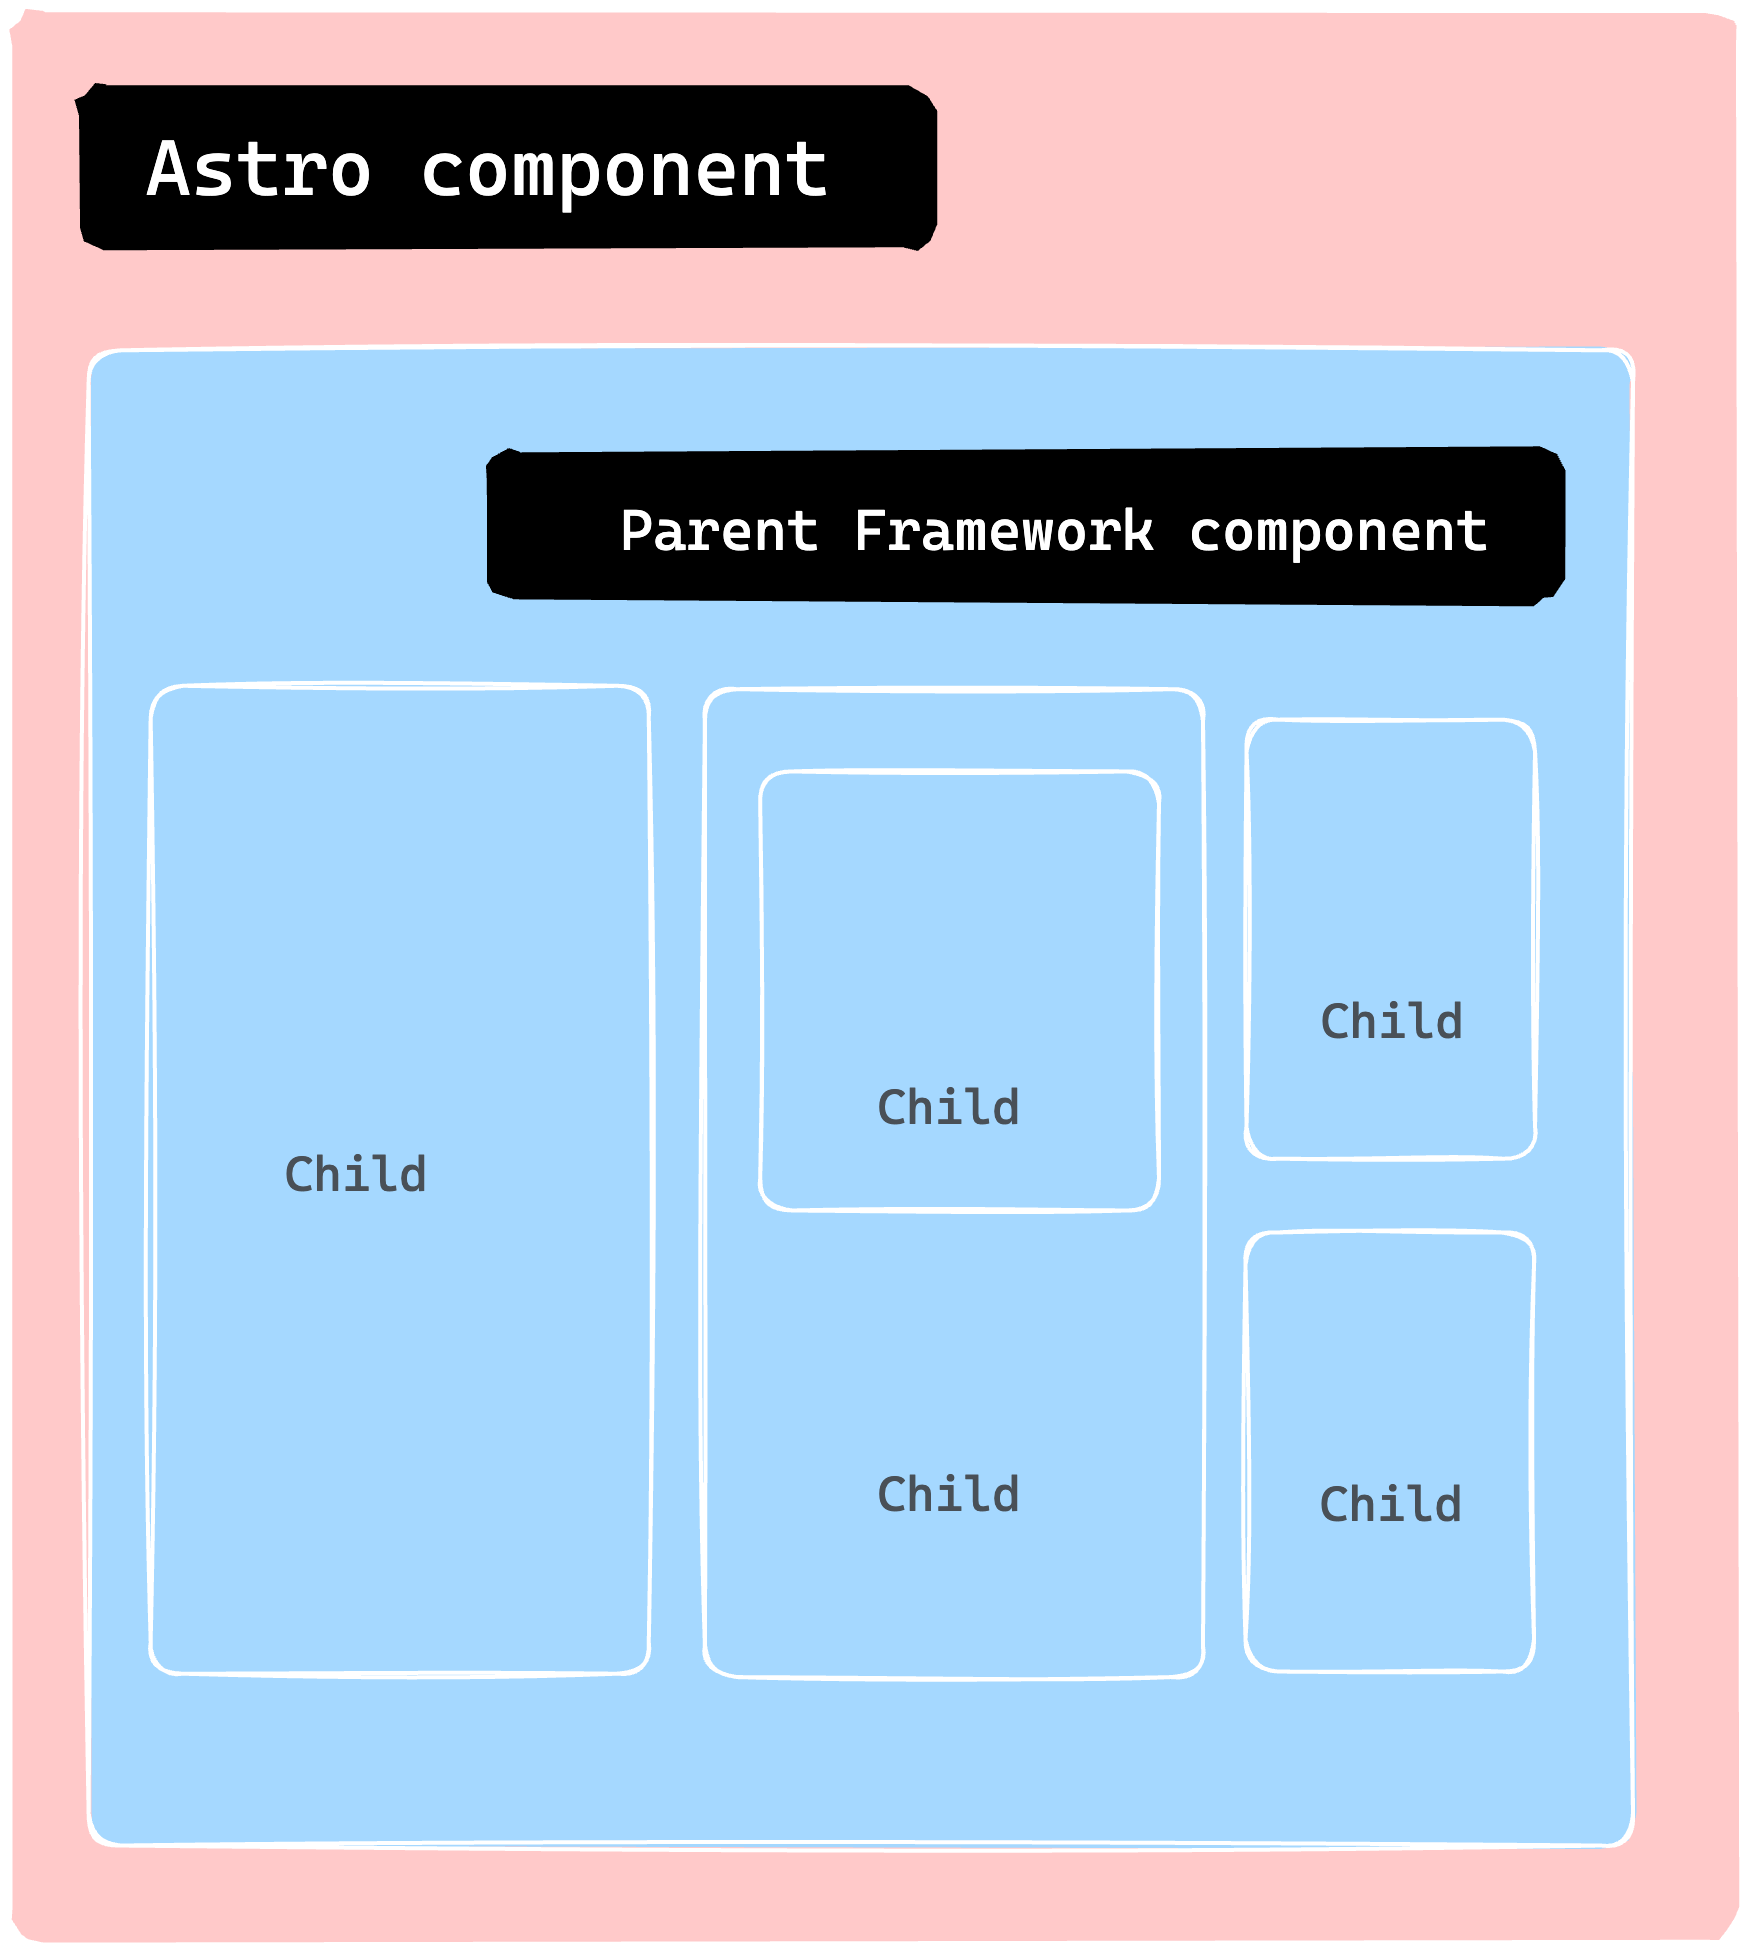 Nesting multiple child components to make a more significant application.